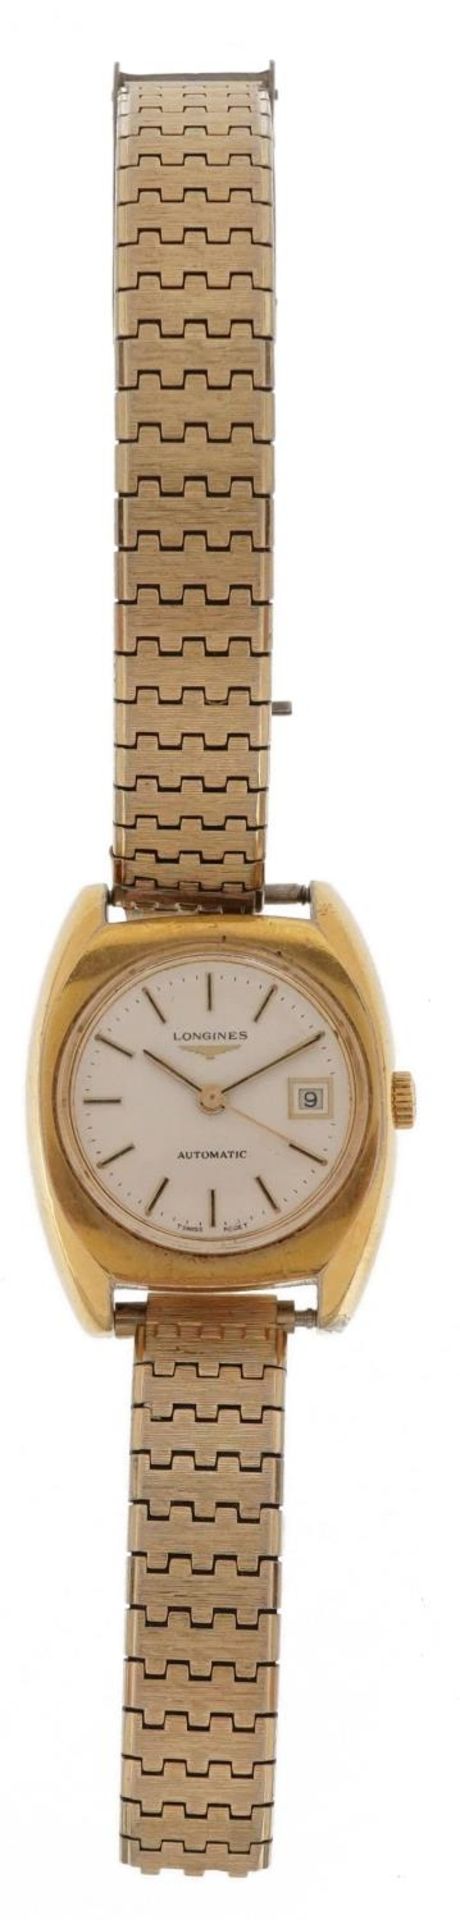 Longines, ladies gold plated automatic wristwatch with date aperture, the case 25mm wide : For - Image 2 of 5